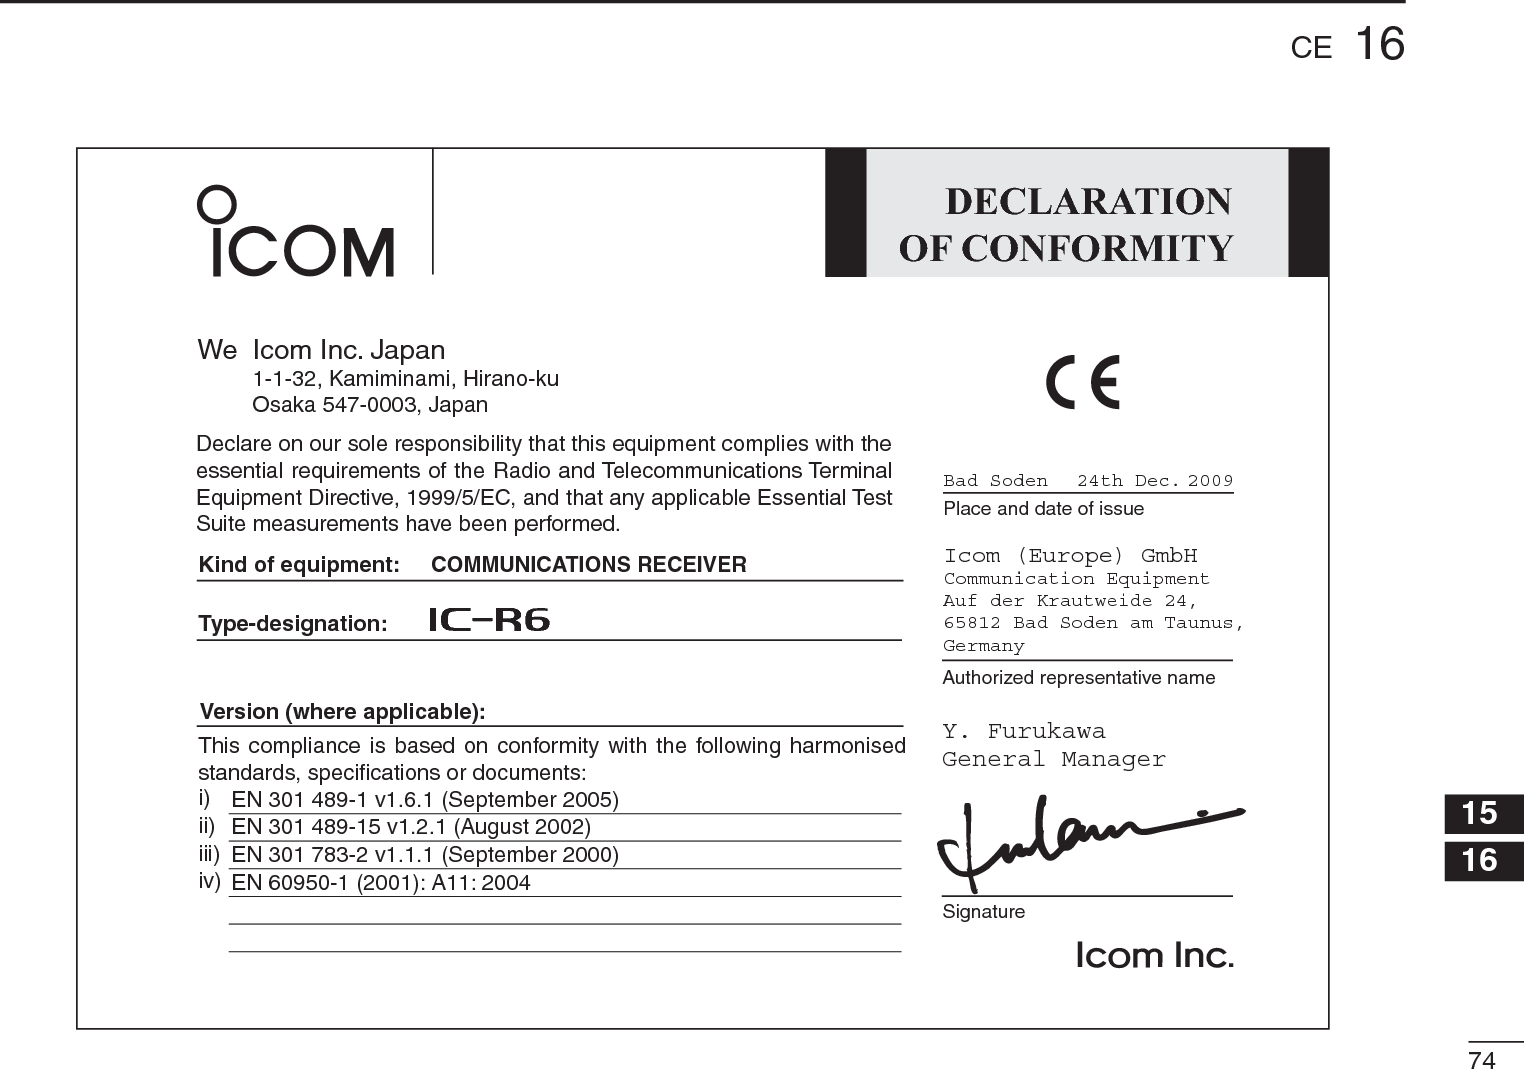 7416CE12345678910111213141516DECLARATIONOF CONFORMITYWe Icom Inc. Japan1-1-32, Kamiminami, Hirano-kuOsaka 547-0003, JapanKind of equipment:Type-designation:SignatureAuthorized representative namePlace and date of issueVersion (where applicable):This compliance is based on conformity with the following harmonisedstandards, specifications or documents:Bad SodenY. FurukawaGeneral ManagerIcom (Europe) GmbHCommunication EquipmentAuf der Krautweide 24,65812 Bad Soden am Taunus,Germanyi)ii)iii)iv)Declare on our sole responsibility that this equipment complies with the essential requirements of the Radio and Telecommunications TerminalEquipment Directive, 1999/5/EC, and that any applicable Essential TestSuite measurements have been performed.EN 301 489-1 v1.6.1 (September 2005)EN 301 489-15 v1.2.1 (August 2002)EN 301 783-2 v1.1.1 (September 2000)EN 60950-1 (2001): A11: 2004COMMUNICATIONS RECEIVERiC- r624th Dec. 2009